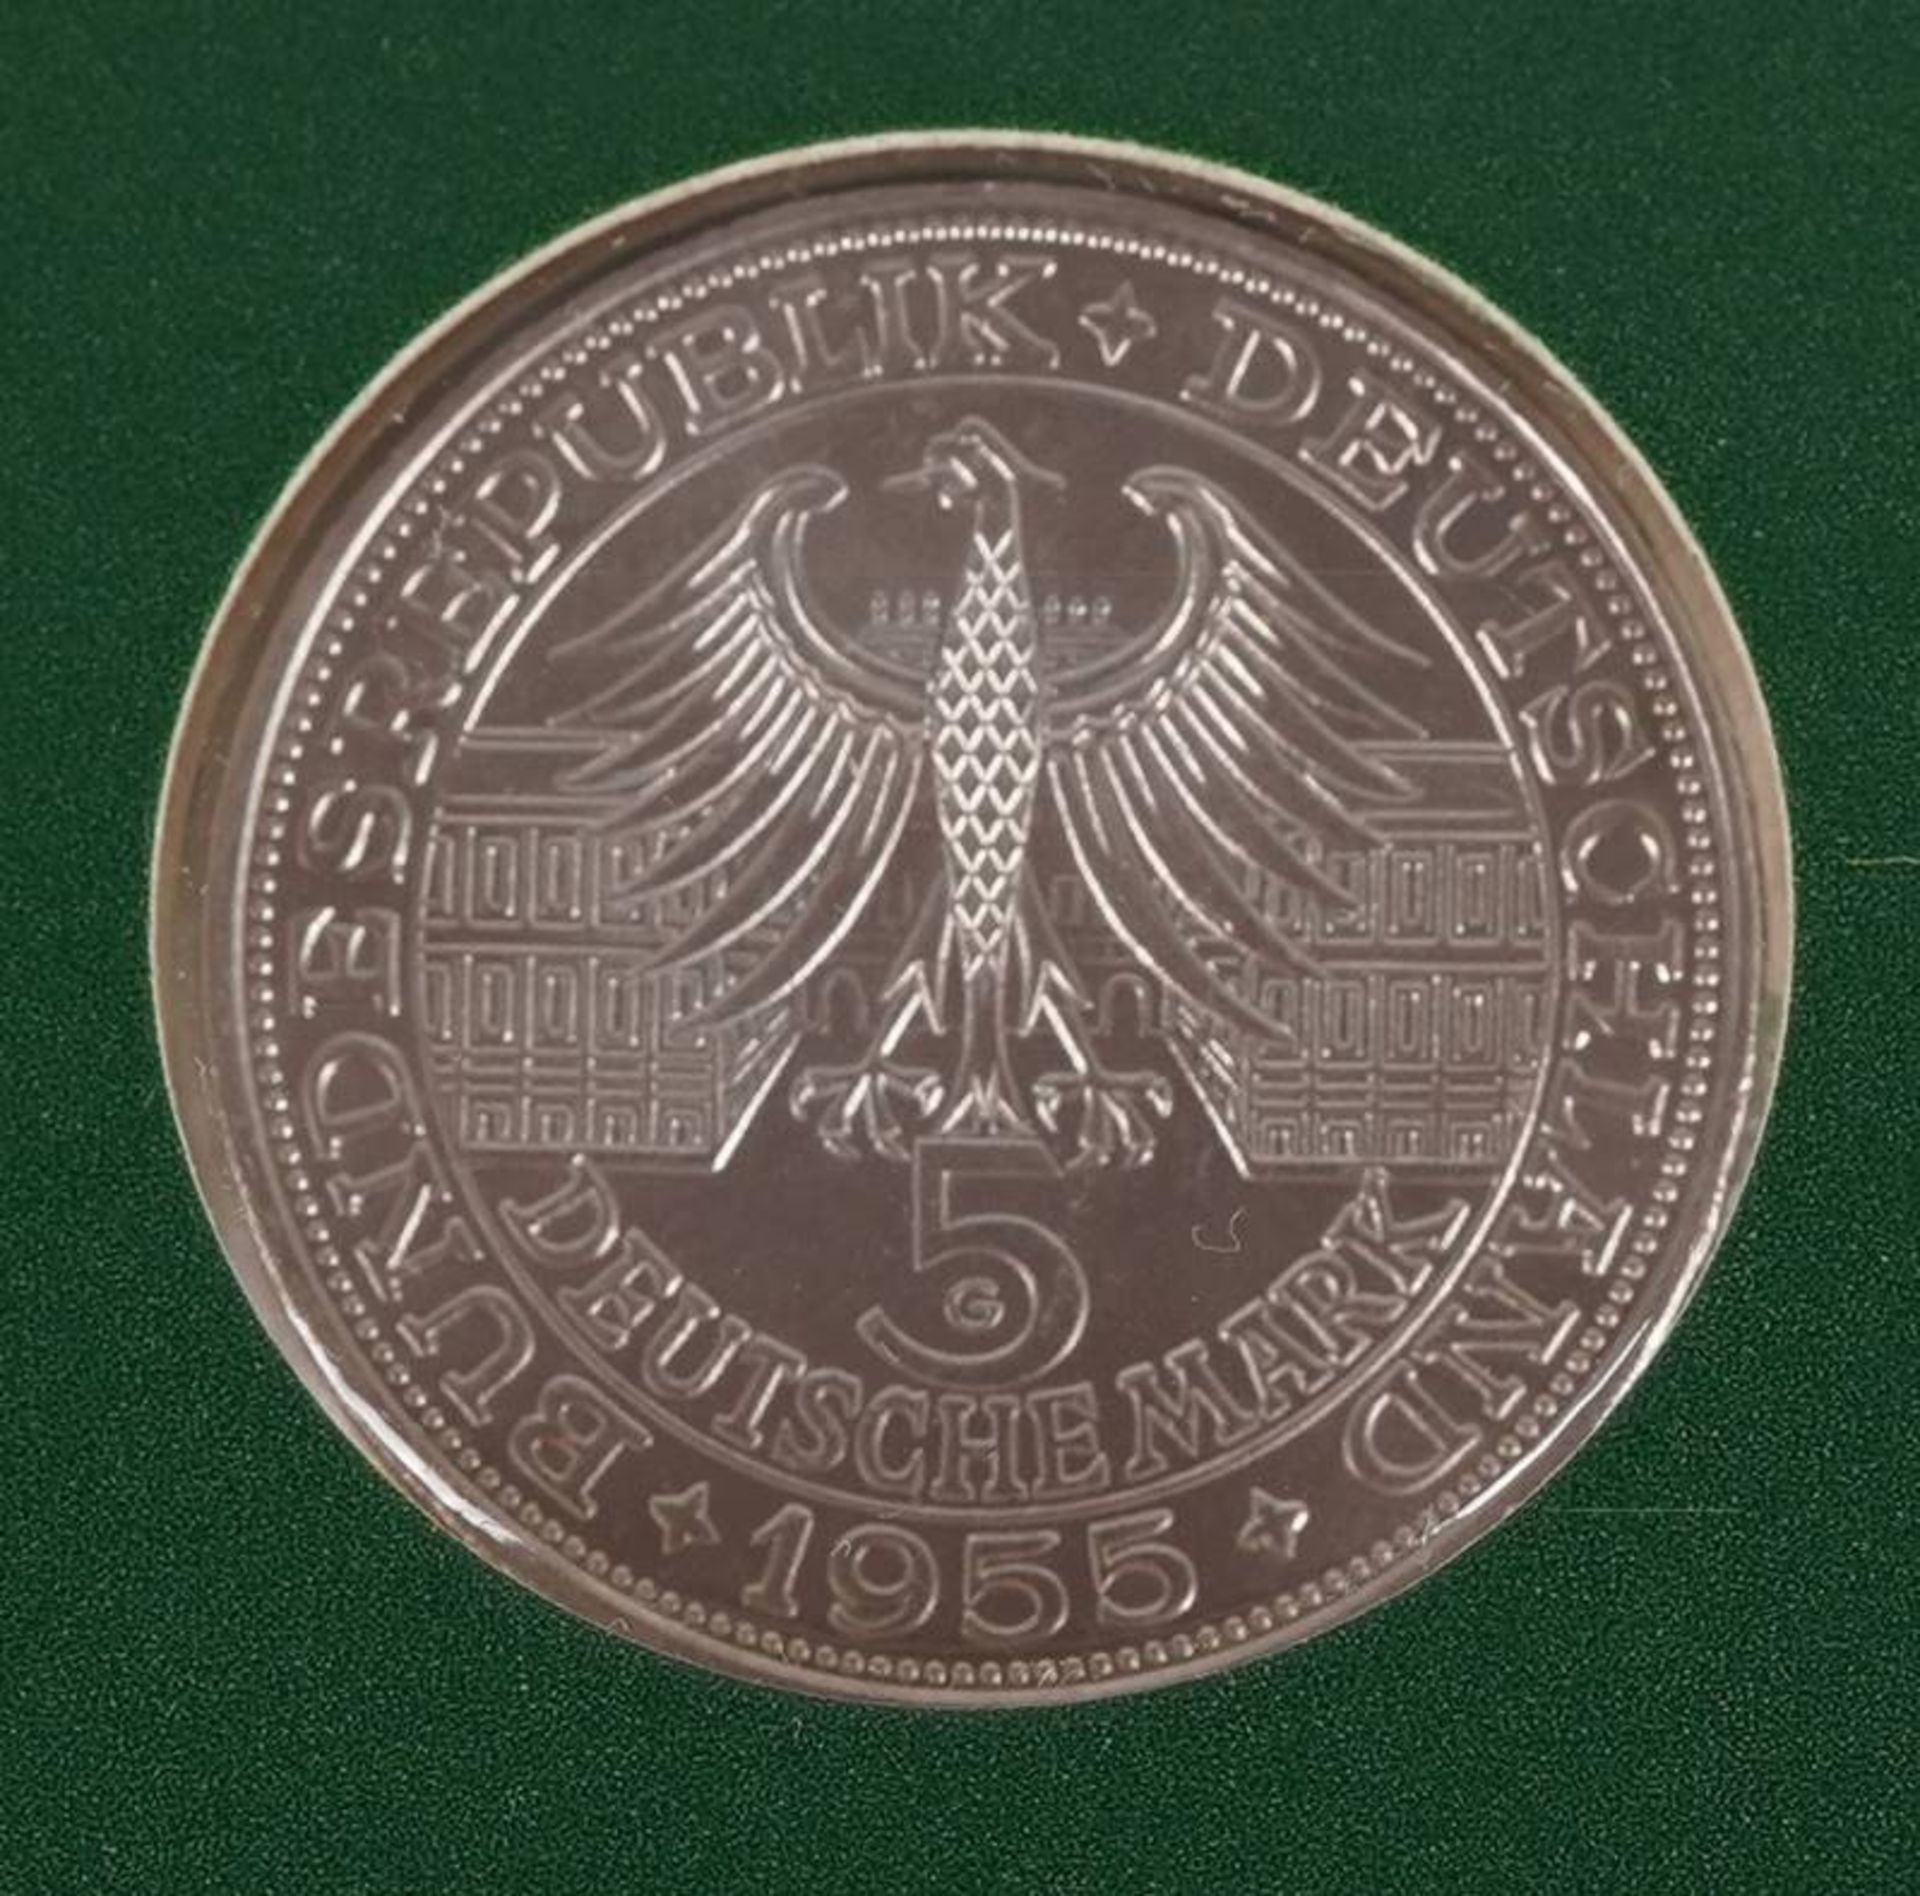 5 DM Commemorative Coin - Image 2 of 2